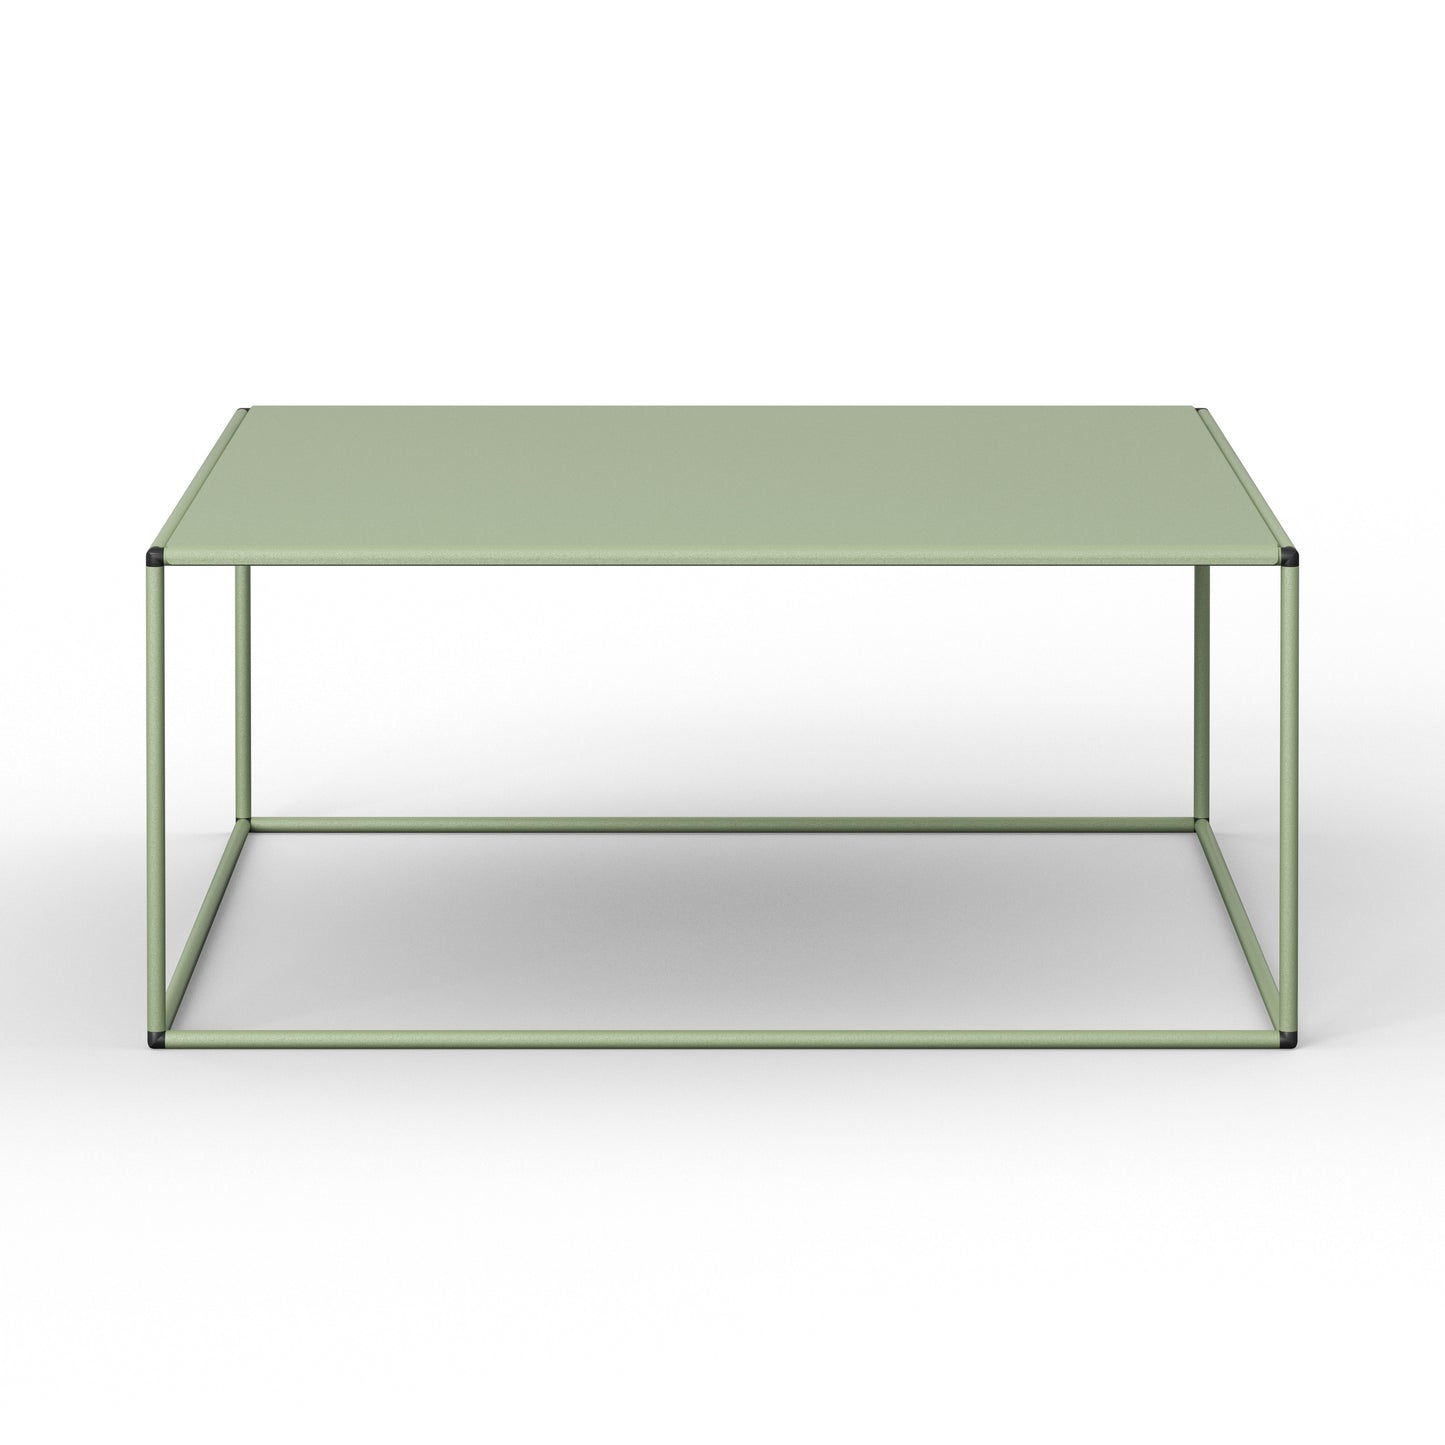 Outdoor Table 80 Light Green - New!